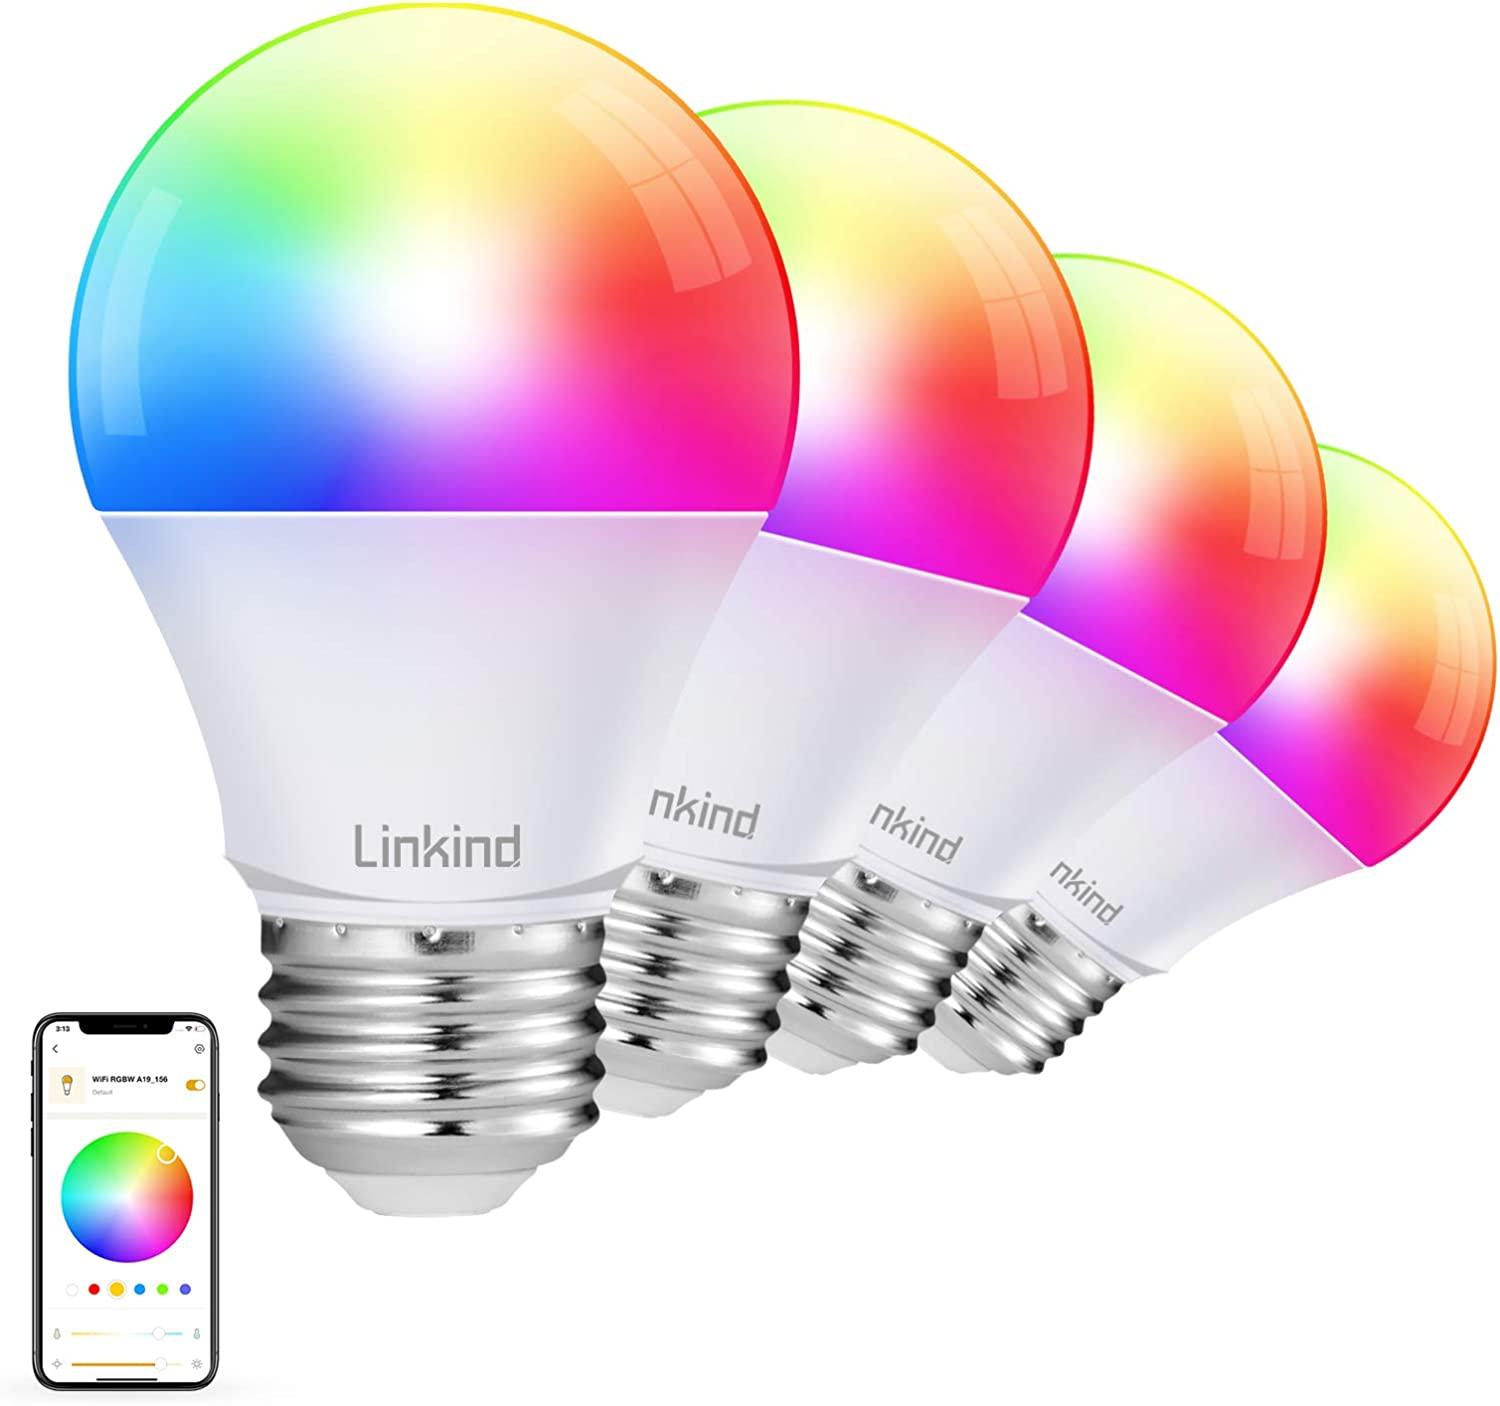 Linkind RGB 60W 4 Equivalent Dimmable Smart Light Bulbs for $8.99